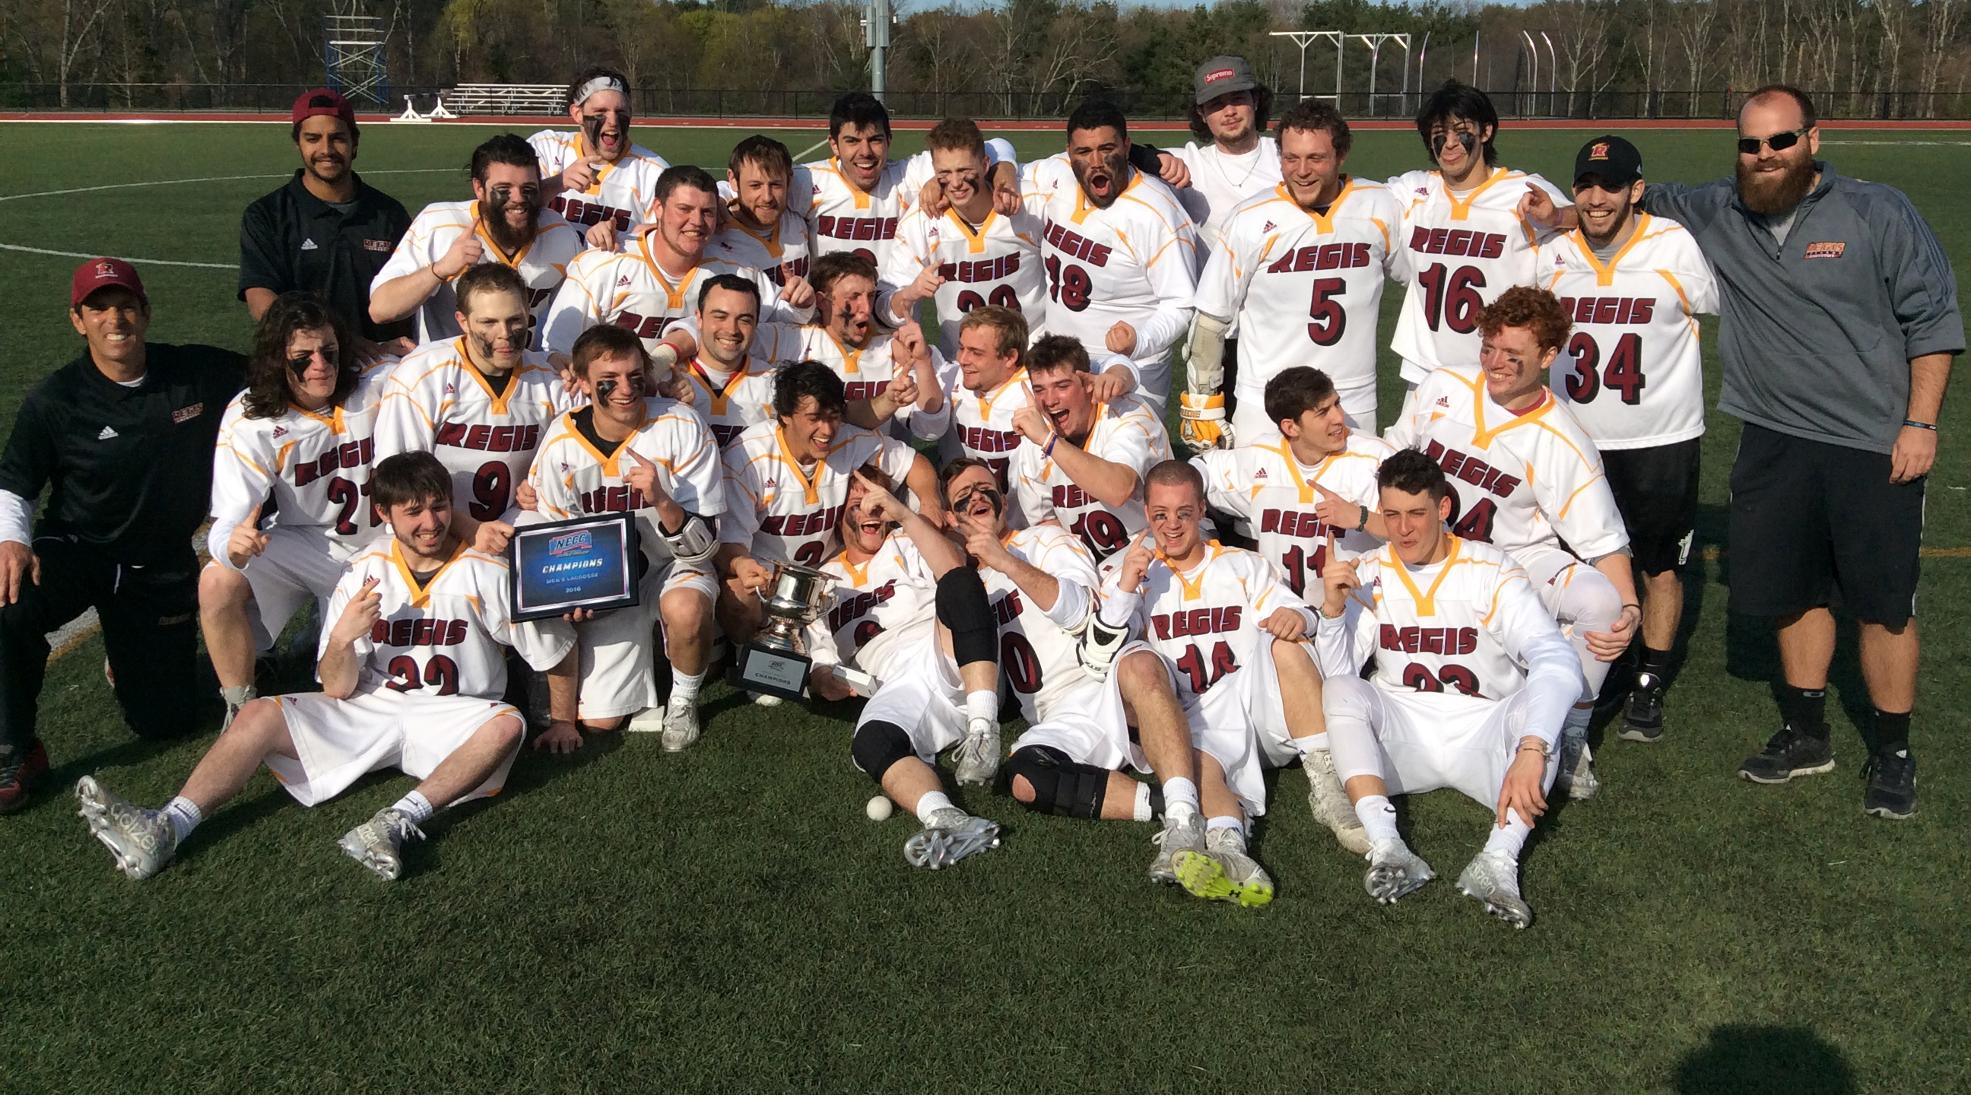 PRIDE MEN CAPTURE FIRST CONFERENCE TITLE, BEAT BECKER 10-6